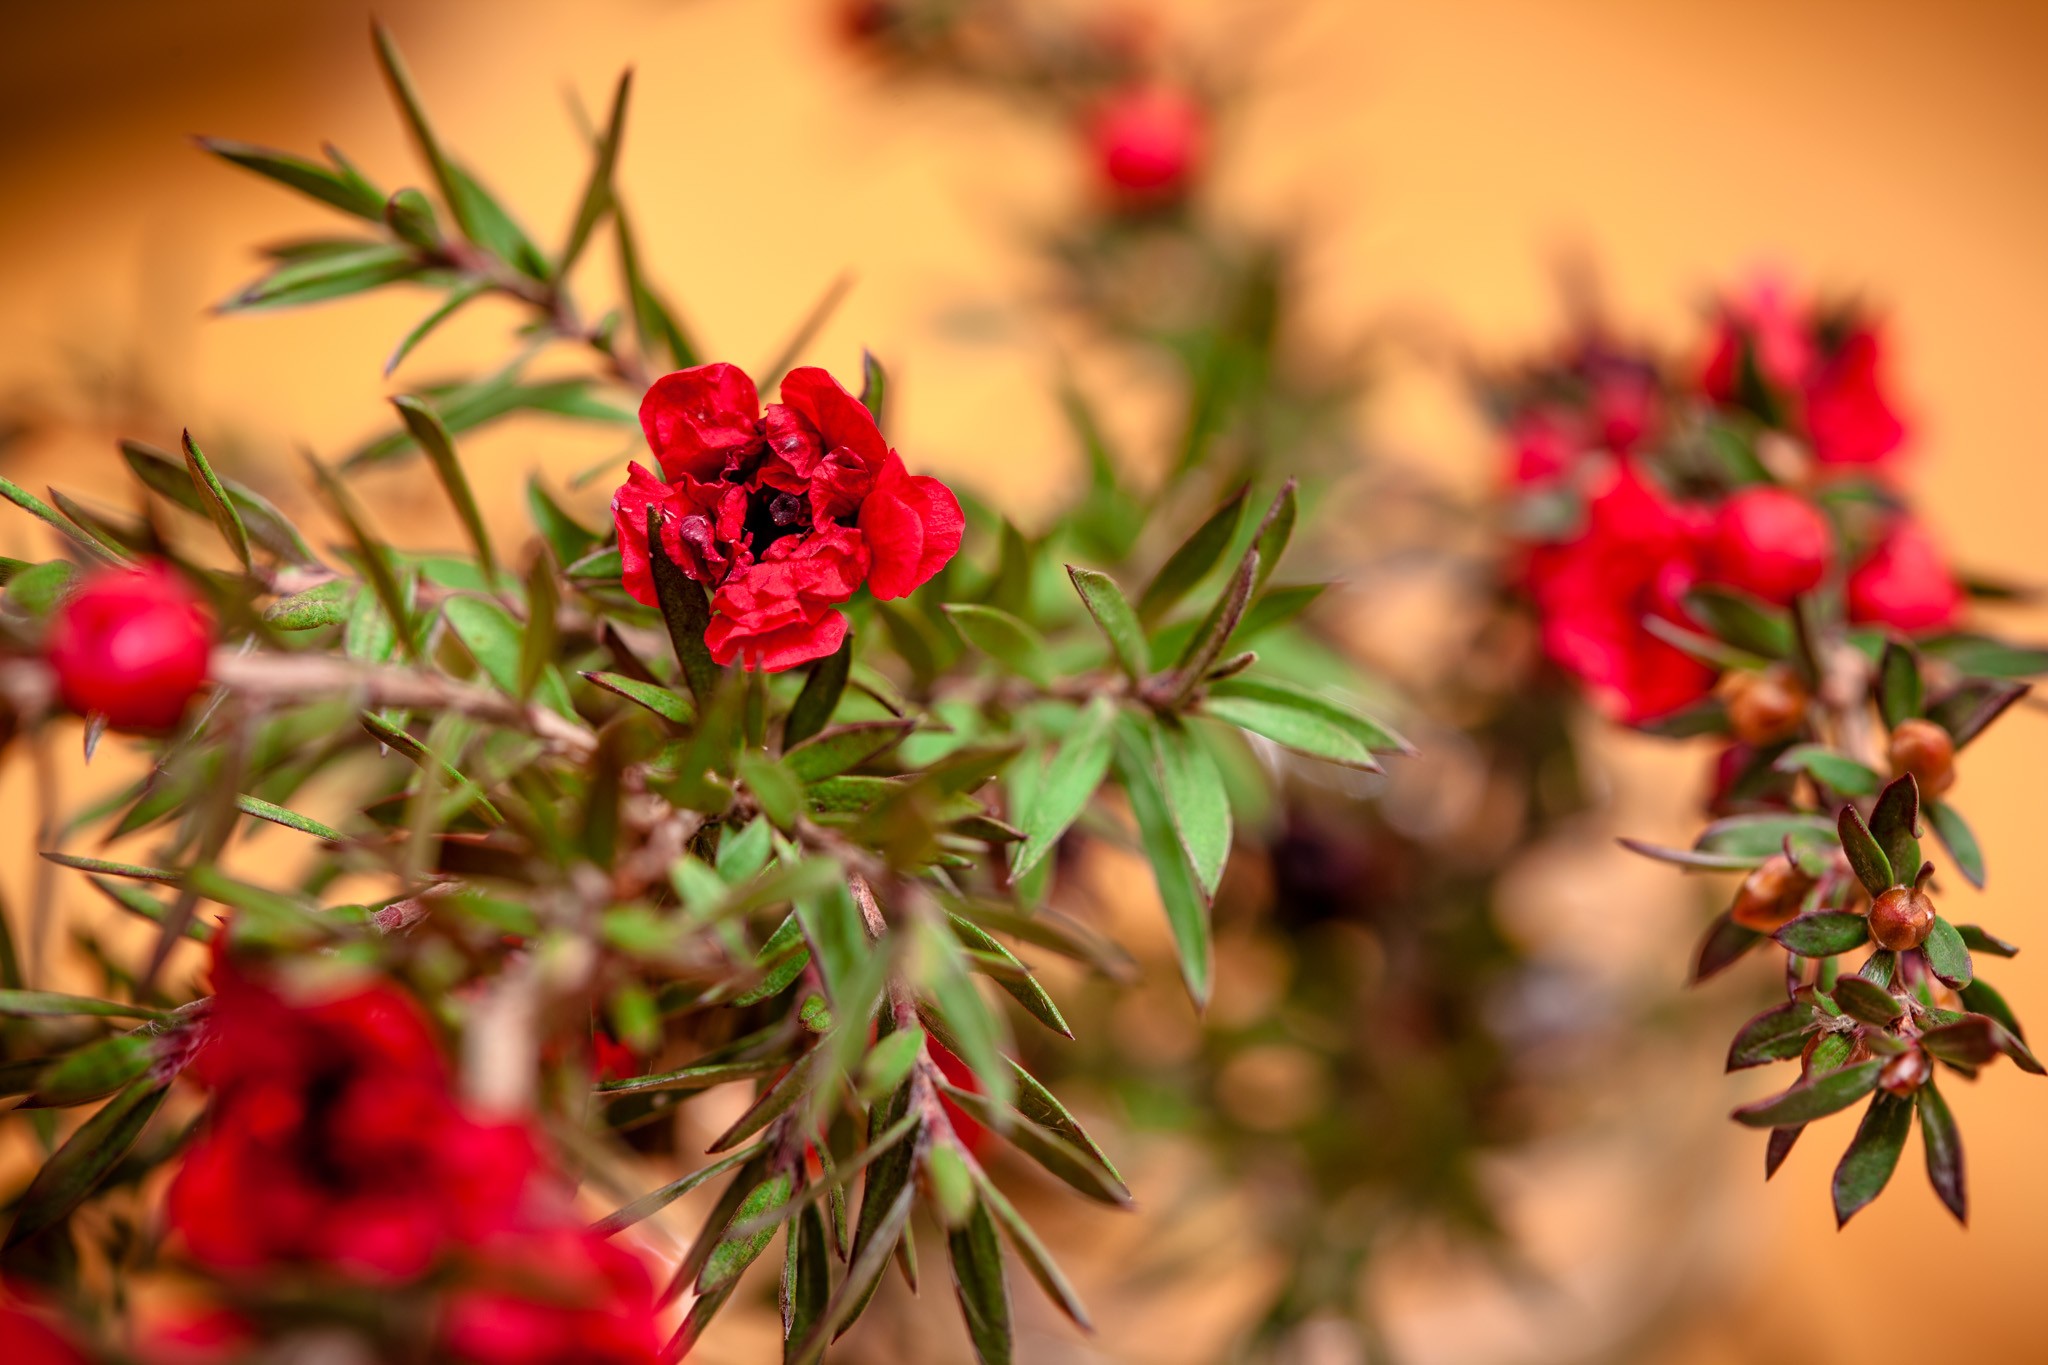 General 2048x1365 nature photography flowers plants red flowers